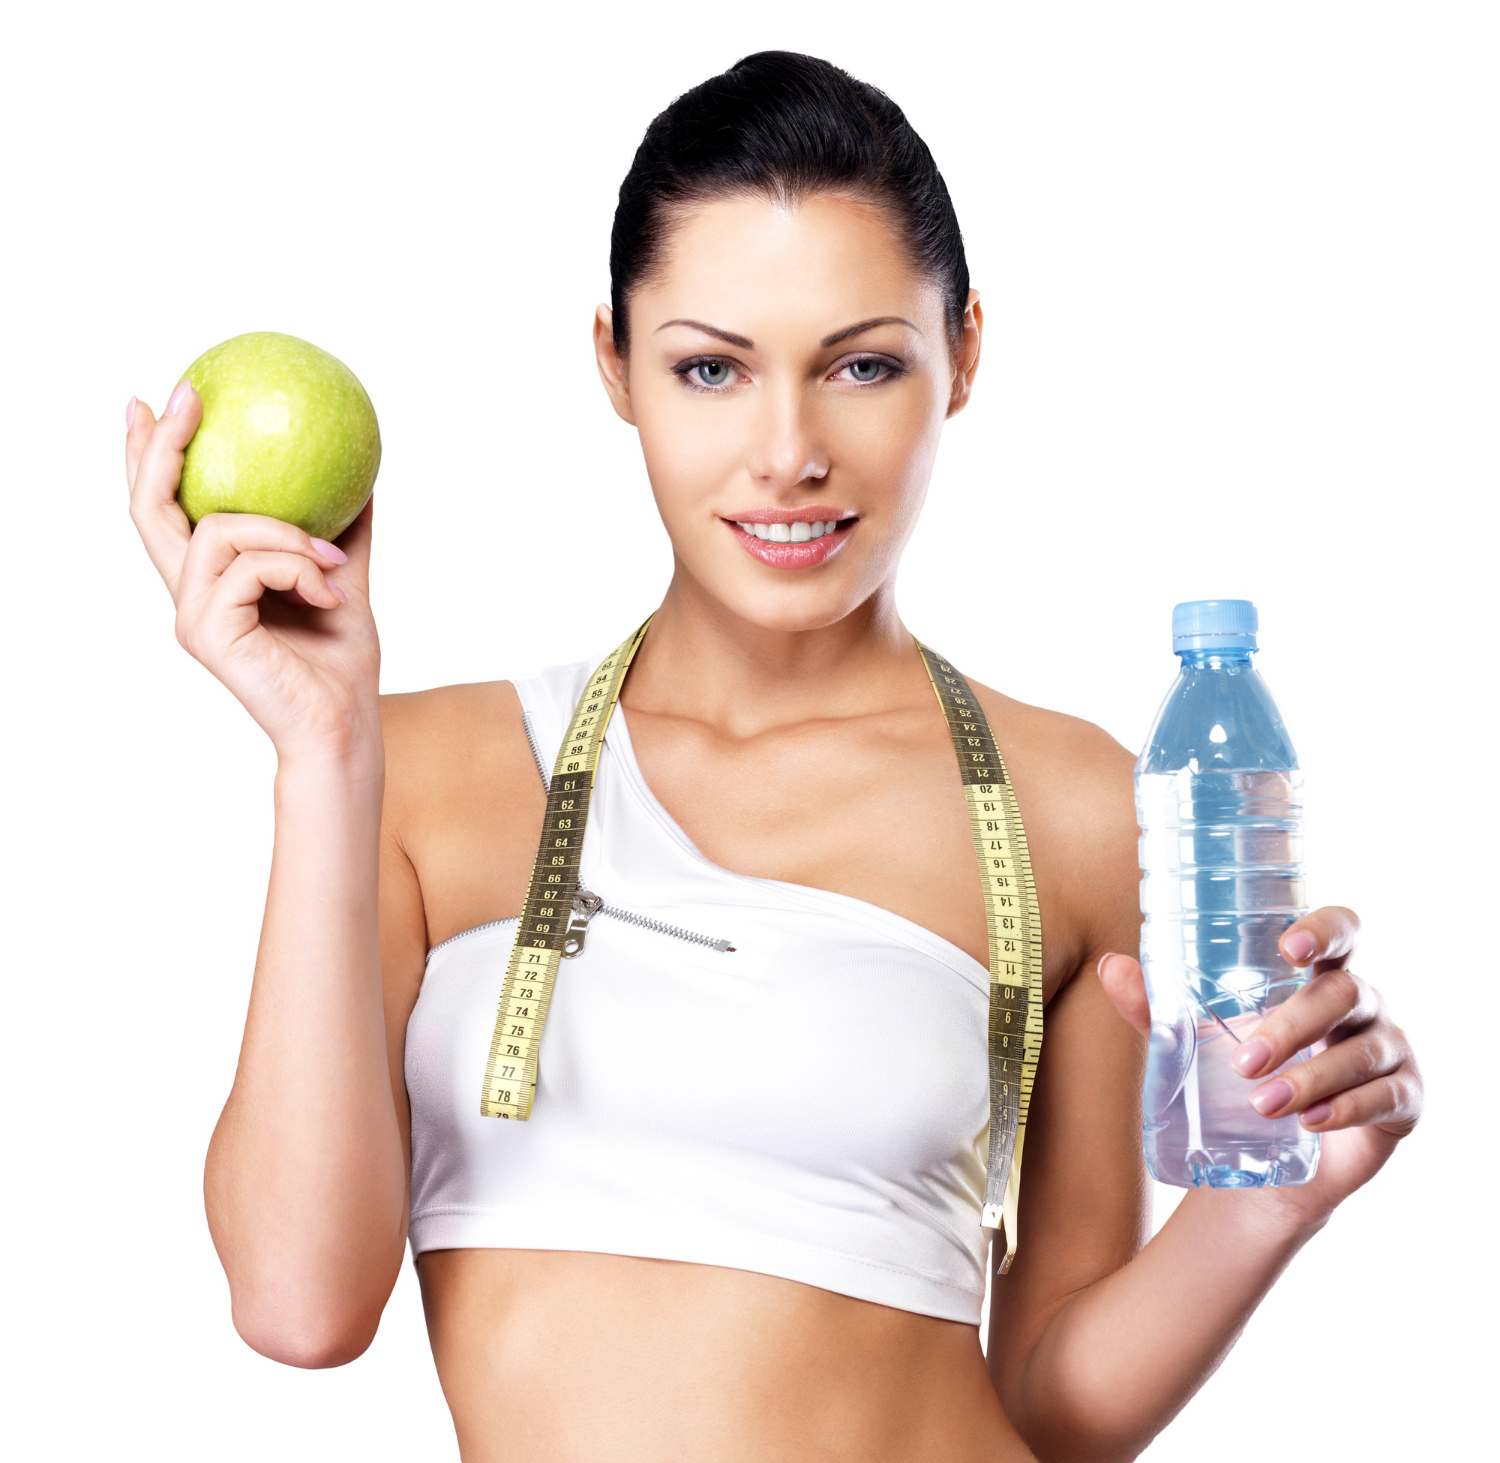 woman with apple and water bottle